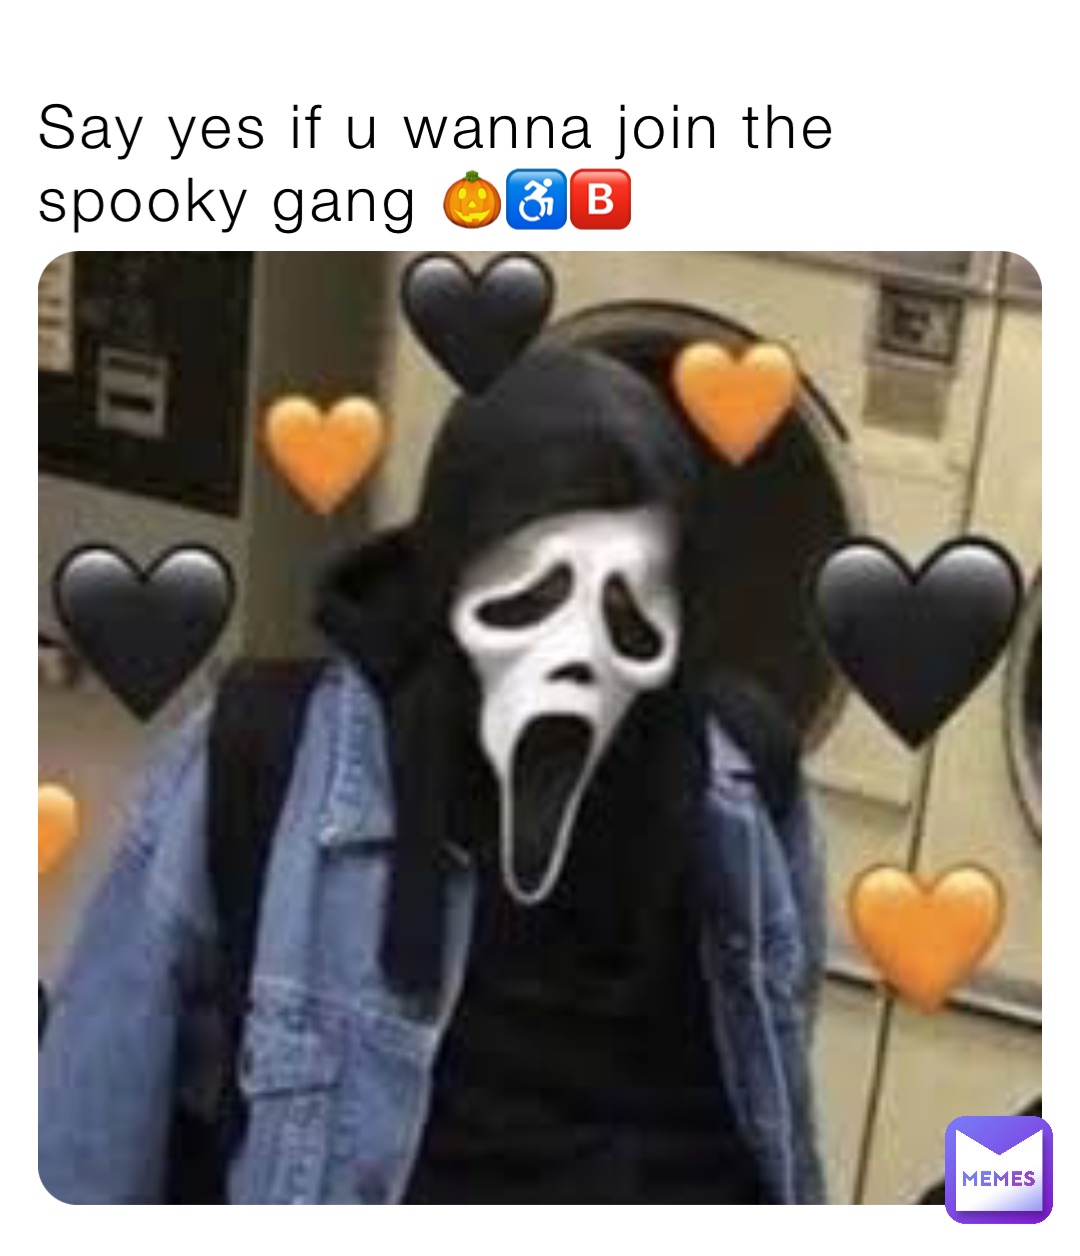 Say yes if u wanna join the spooky gang 🎃♿️🅱️